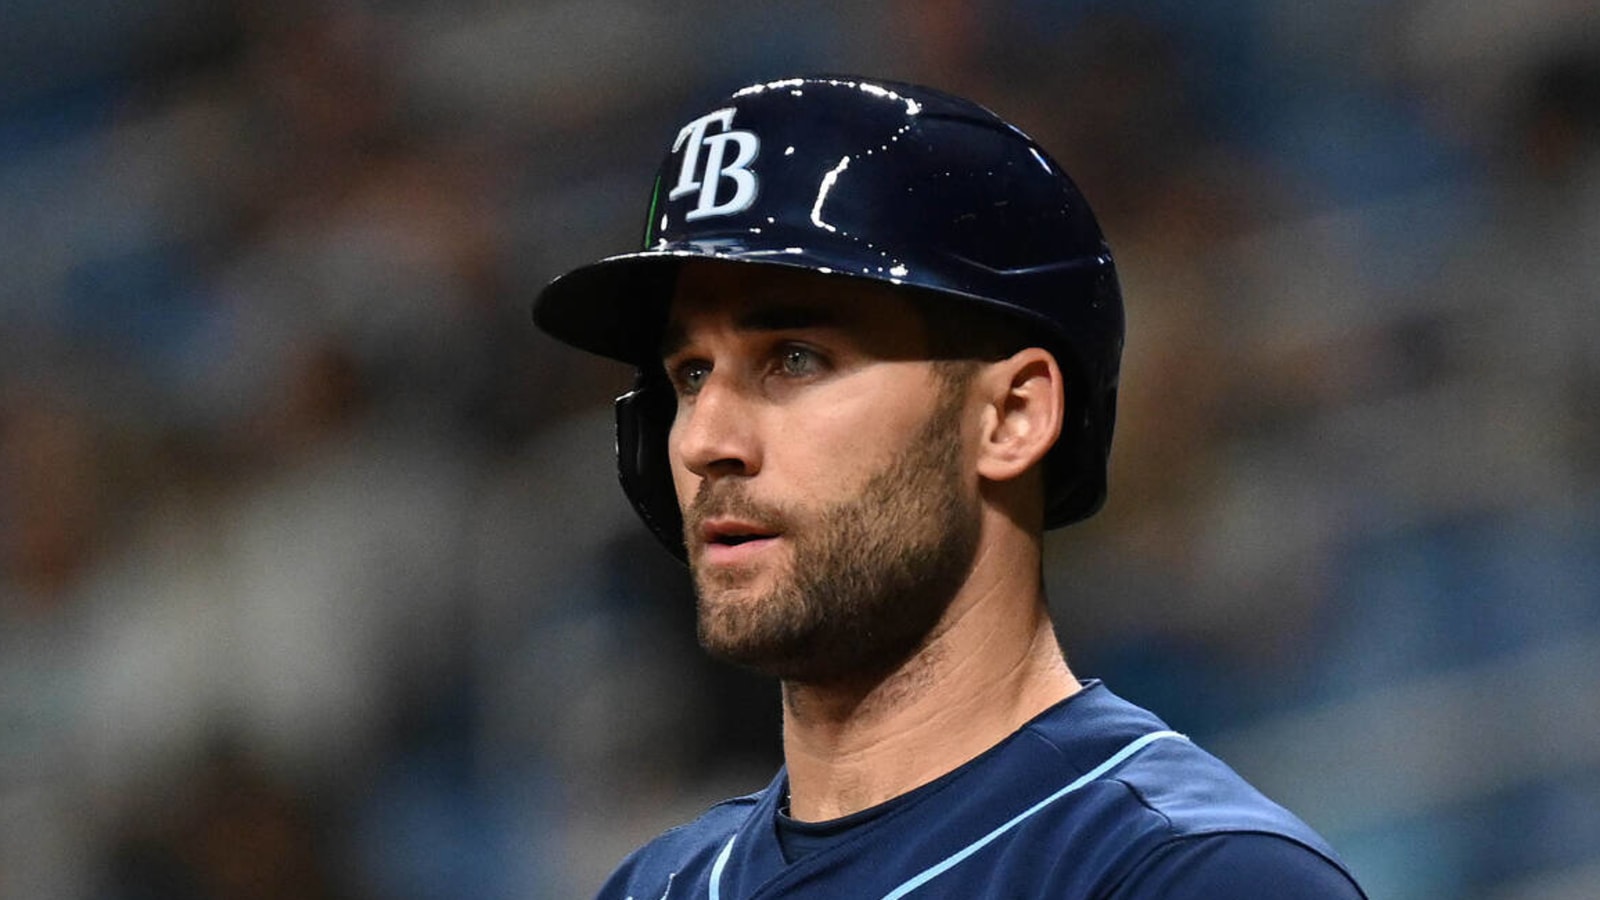 Kevin Kiermaier: Playing on Rays' artificial turf is 'a big issue